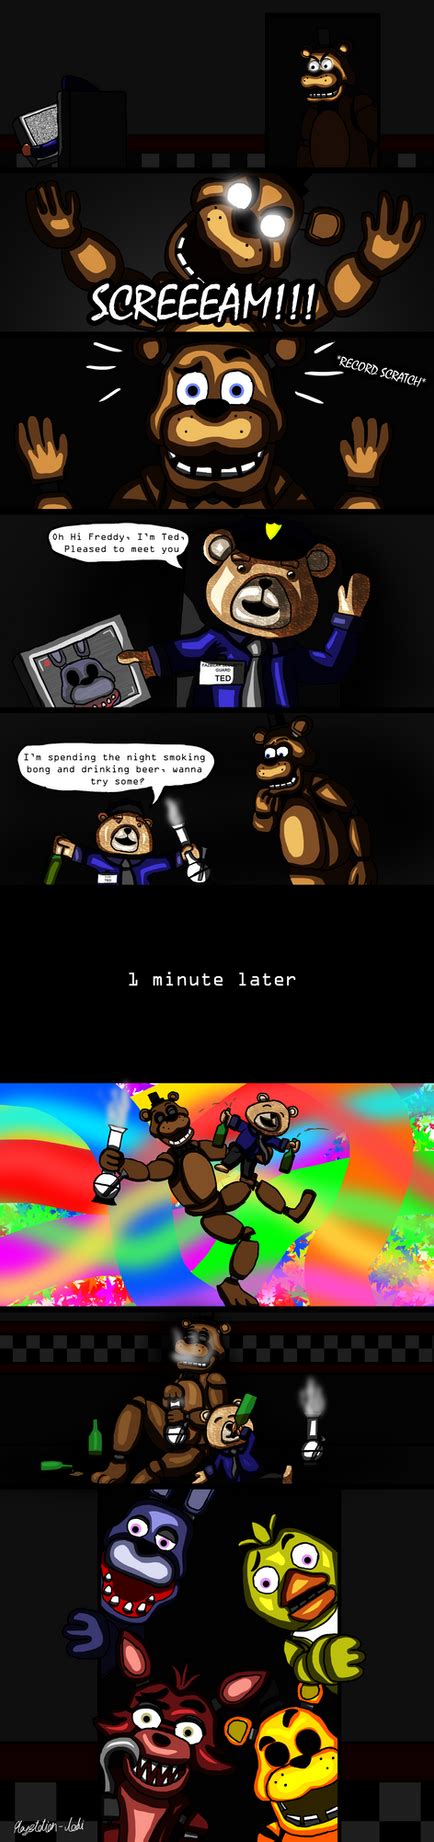 Five Nights At Freddys Image Thread Page 83 Sufficient Velocity